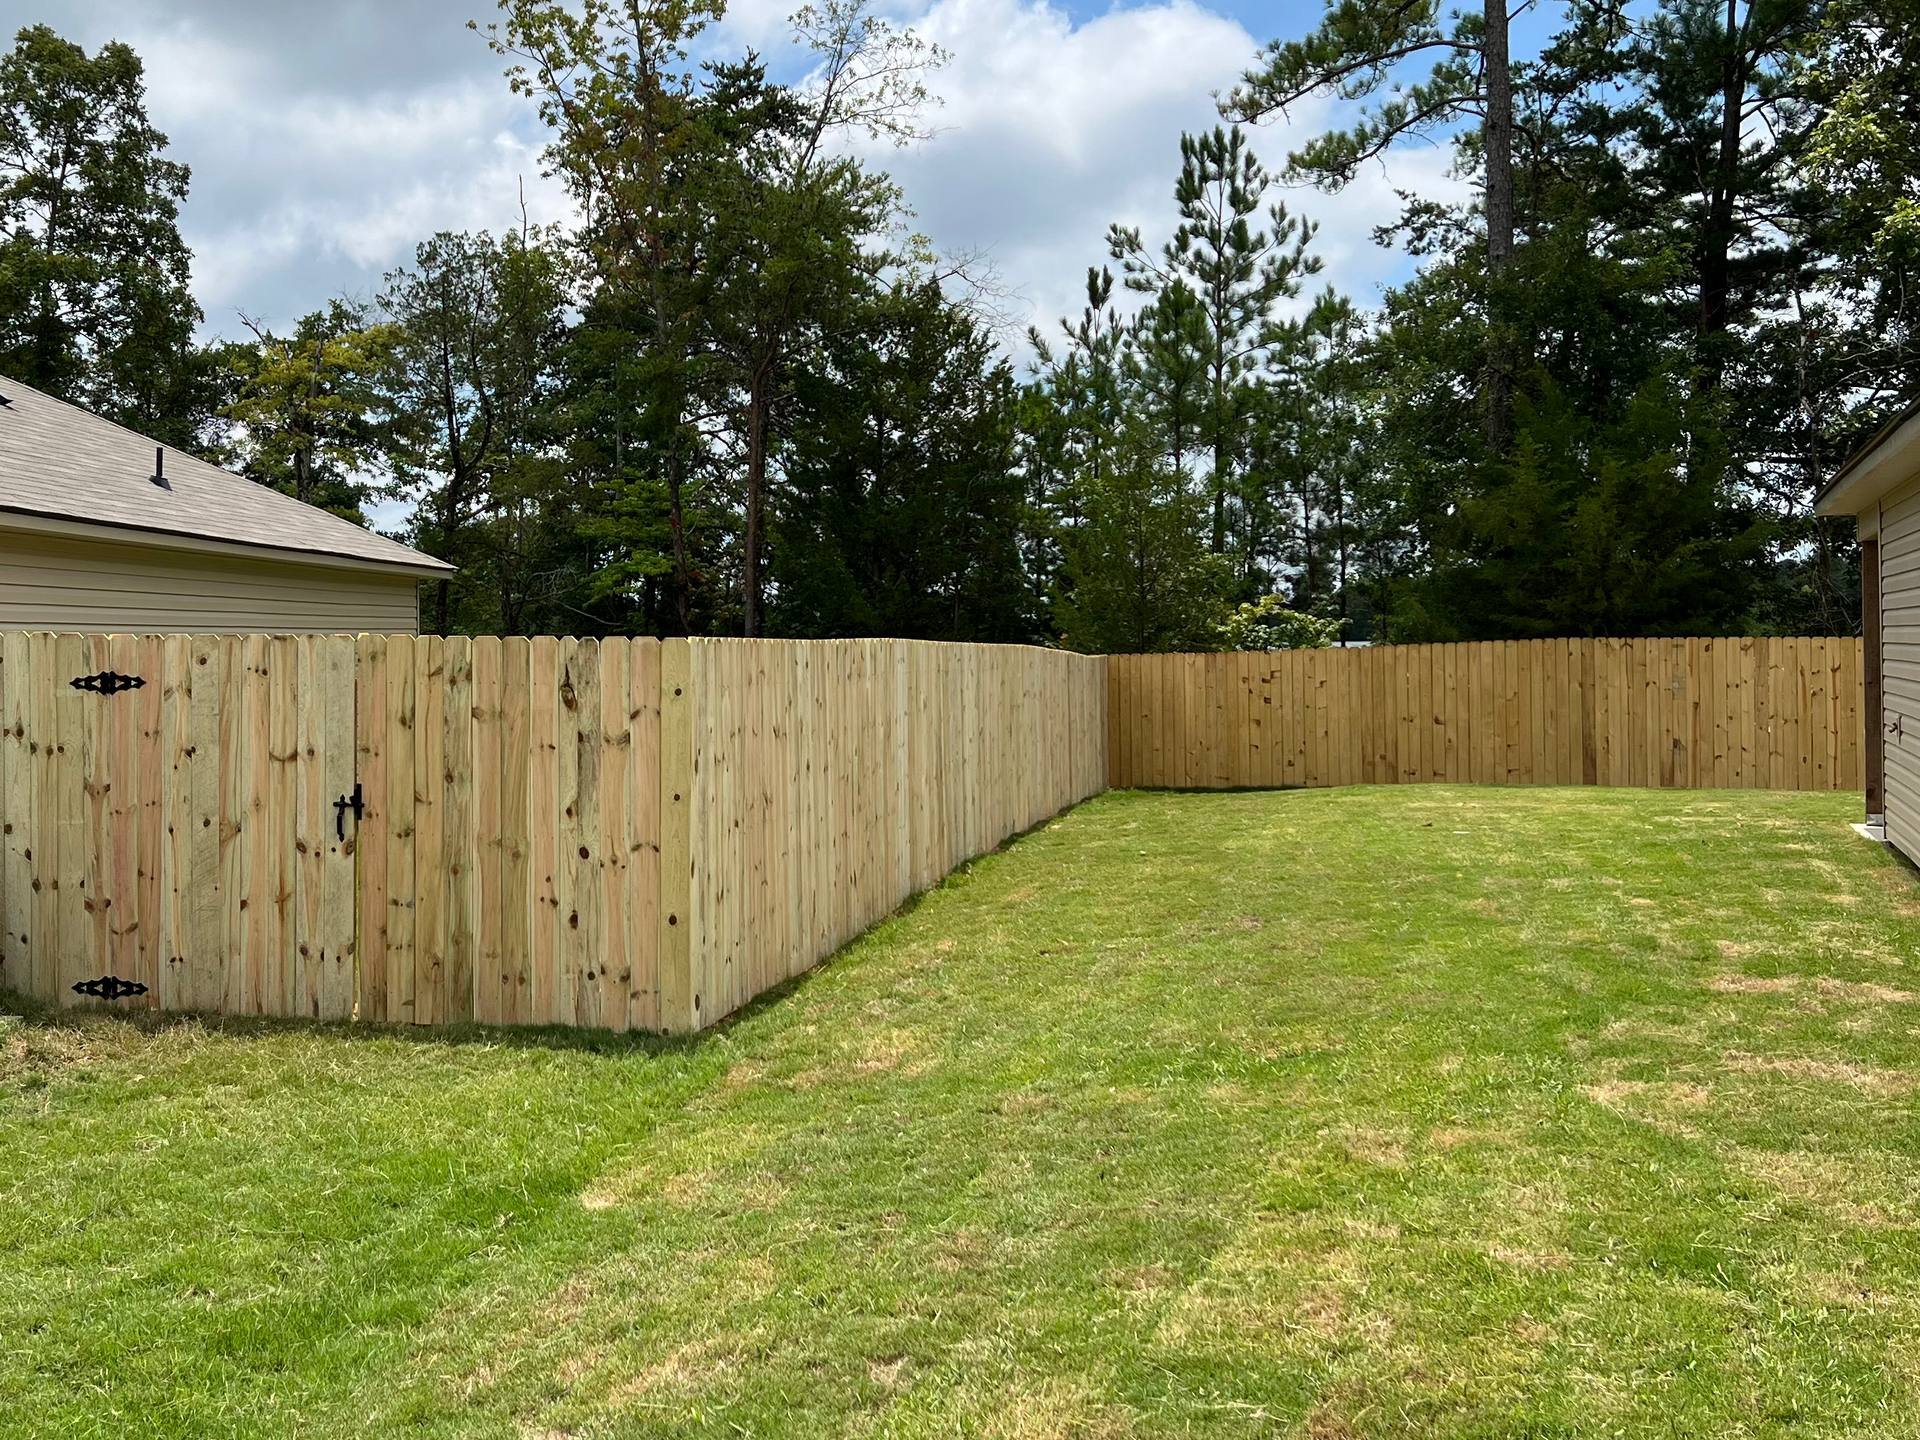 First Class Fence Company Near Birmingham Hoover Pelham Chelsea - Wooden Fence Contractor Installer & Repair